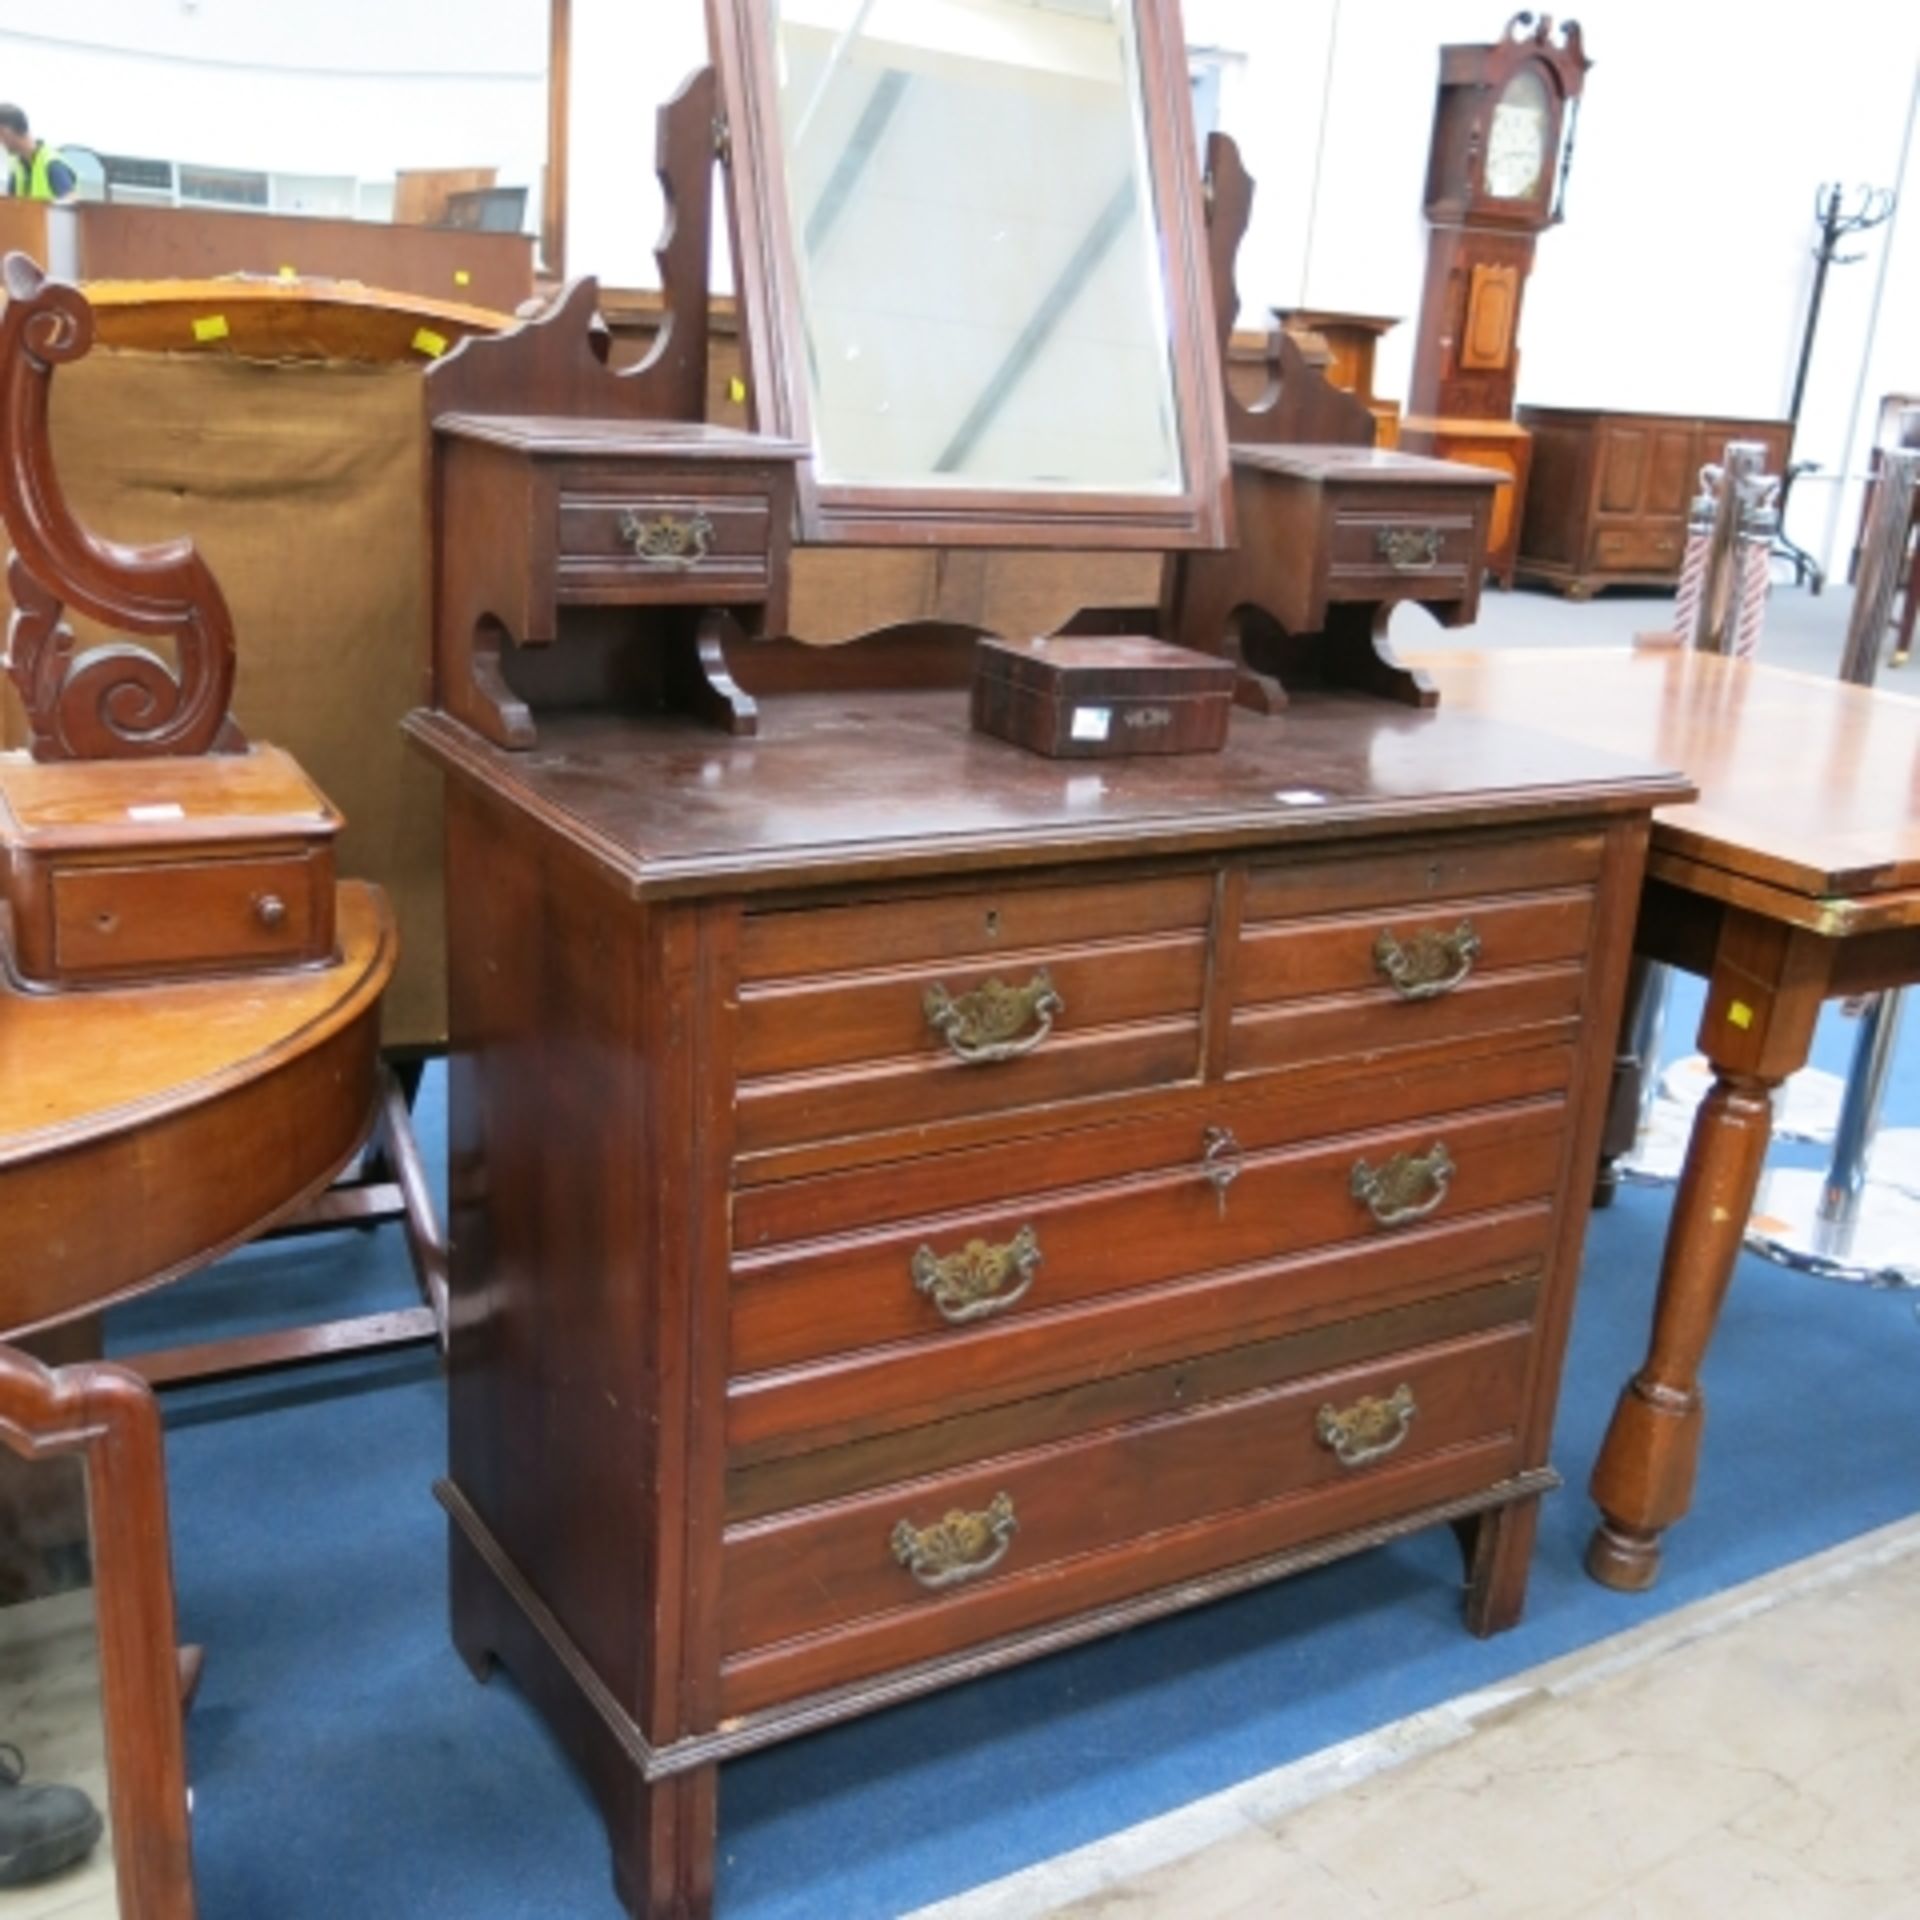 A mahogany dressing table comprising of 2 large drawers and 2 small drawers on the base unit and 2